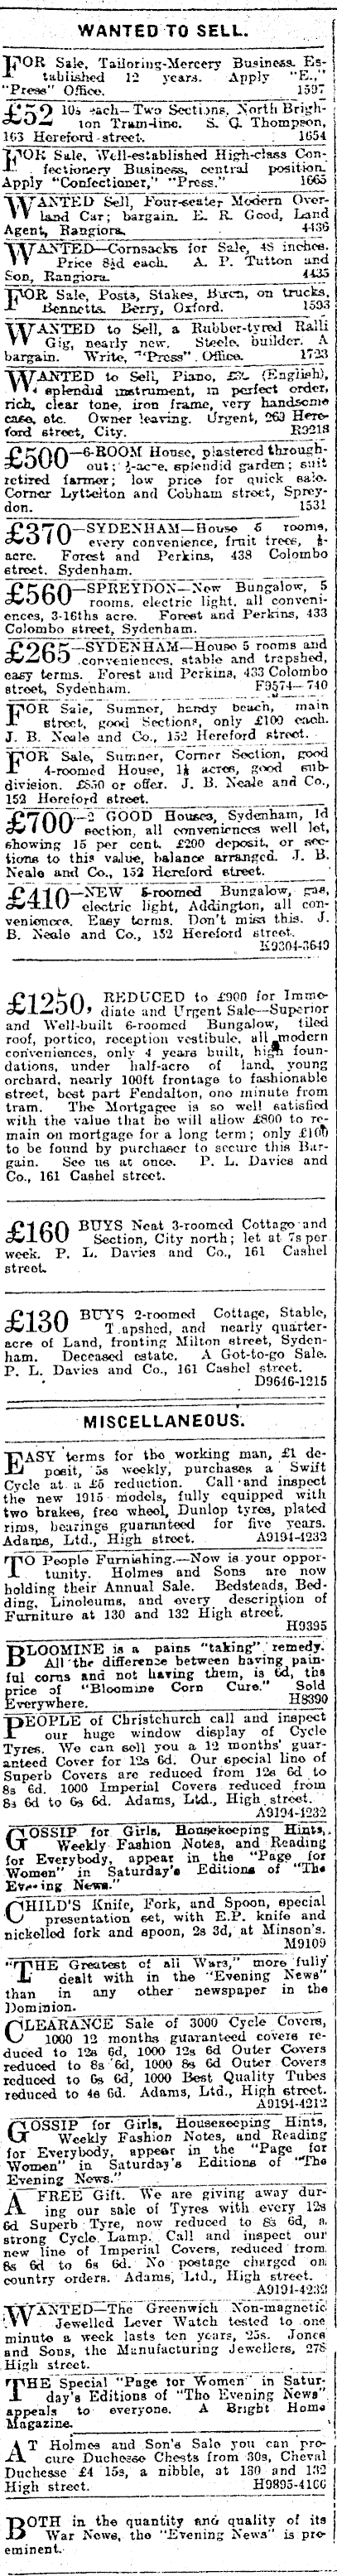 Papers Past Newspapers Press 30 January 1915 Page 11 Advertisements Column 3